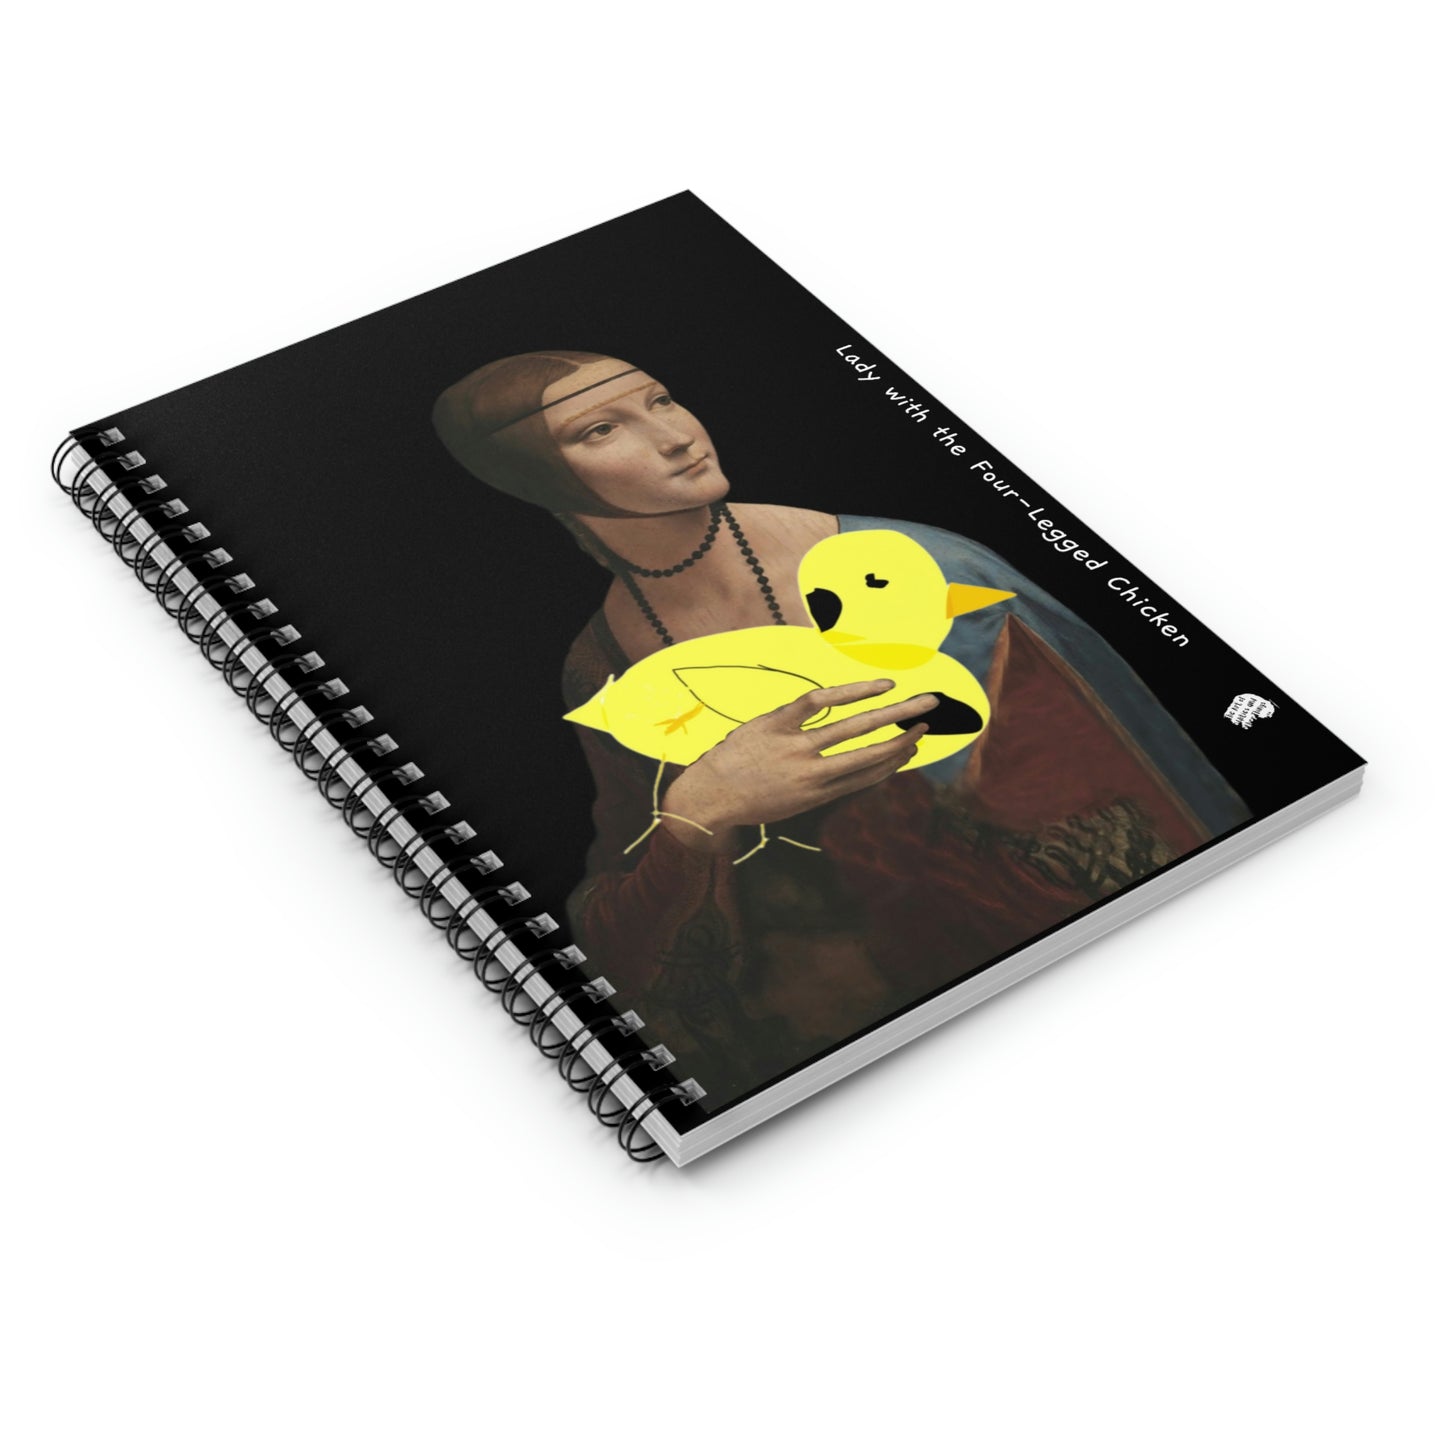 Spiral Notebook - Ruled Line with Lady with the Four-Legged Chicken print by D.B.